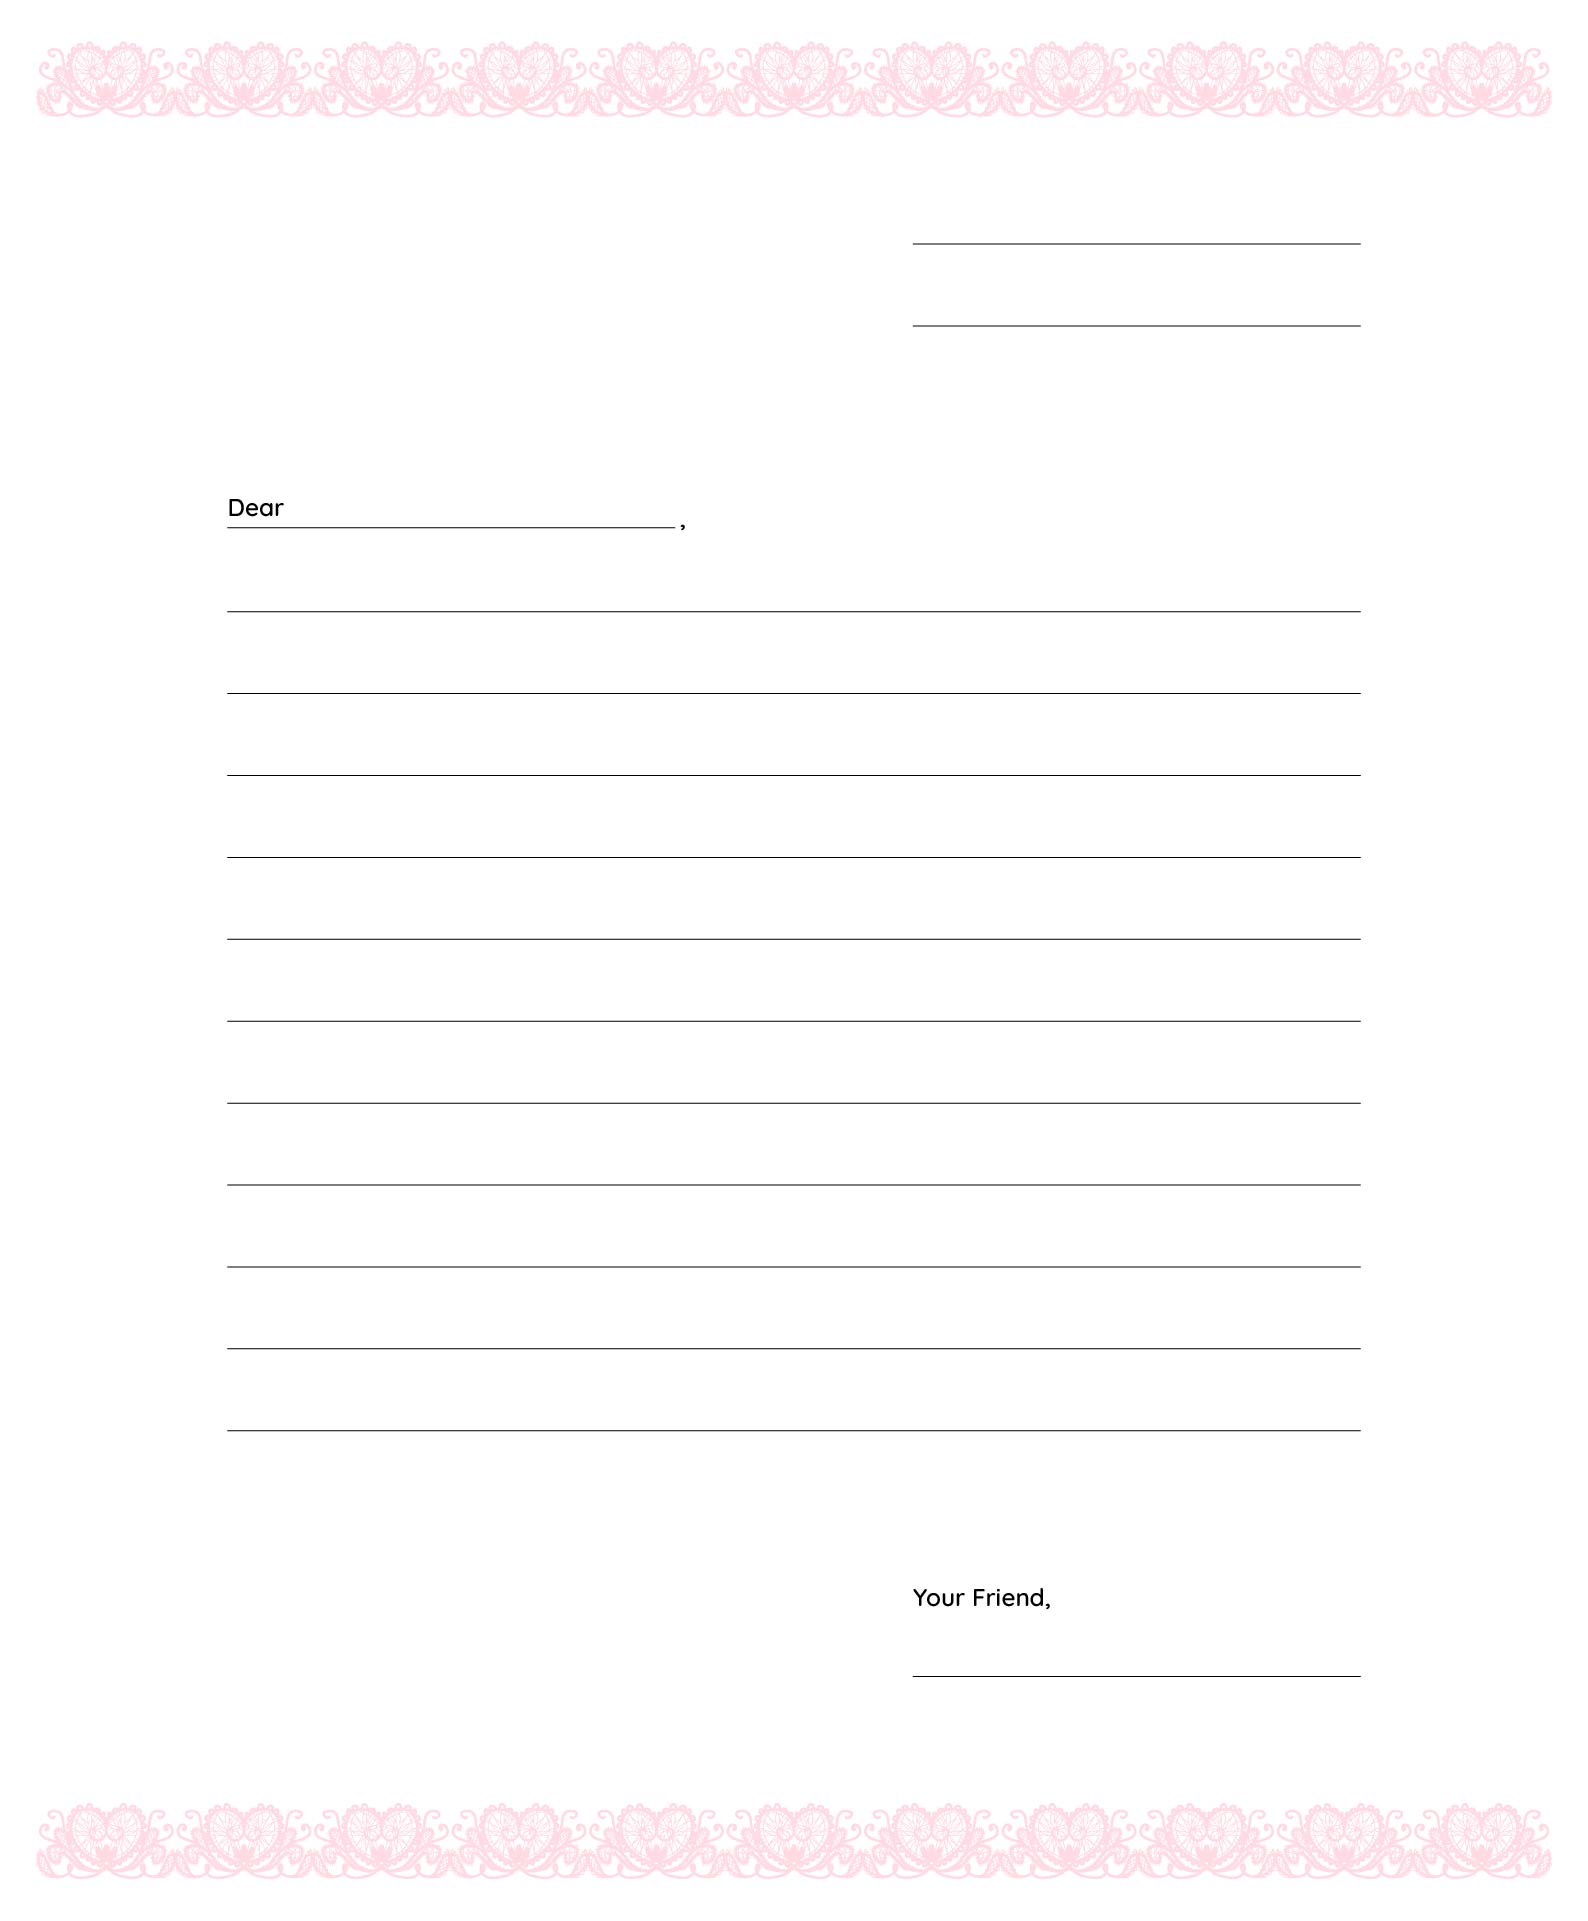 Writing Friendly Letter Template